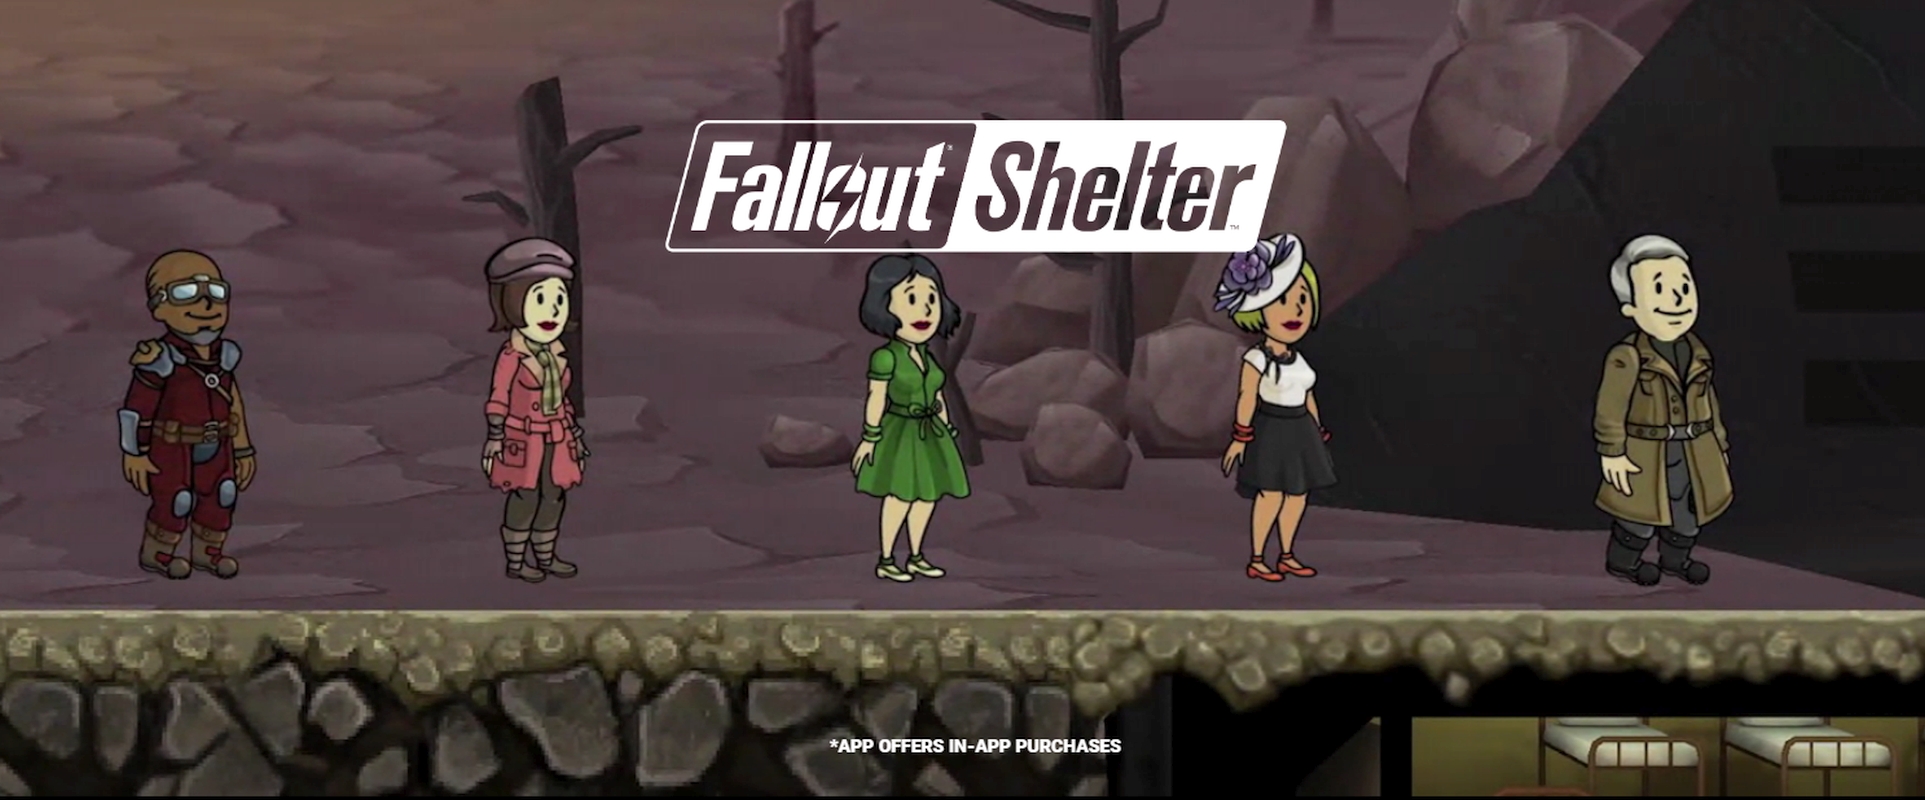 Bethesda Launches Fallout Shelter Online On Mobile Devices In SEA Countries